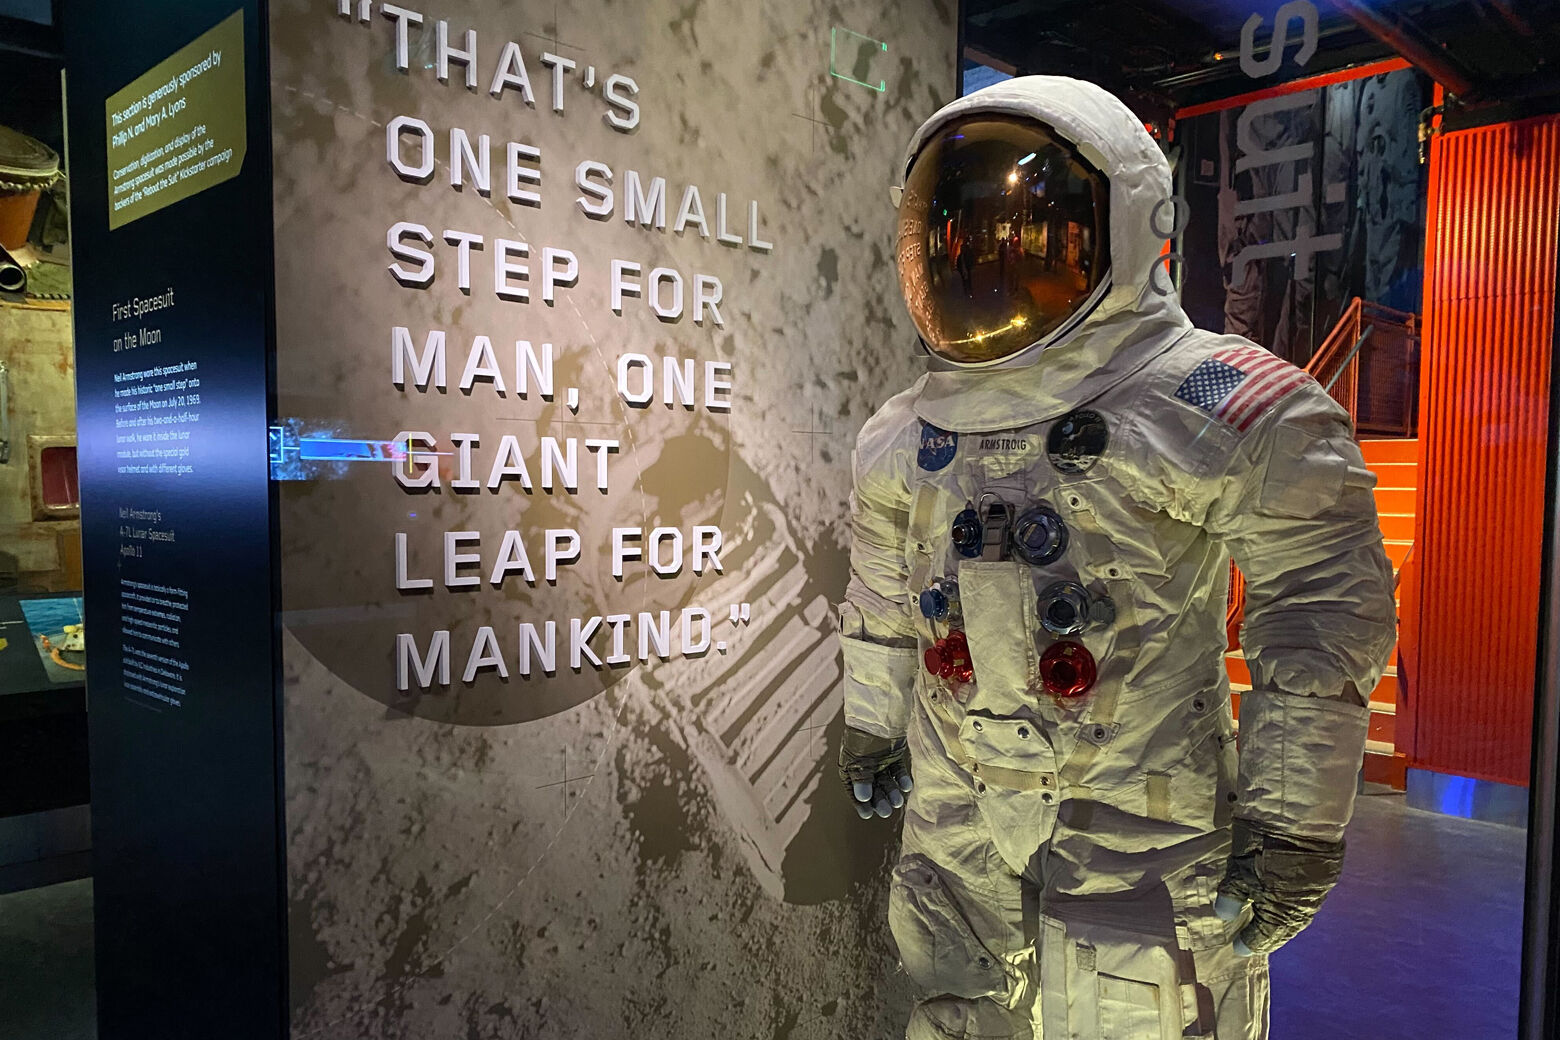 <p>Some artifacts are on display for the first time in decades.</p>
<p>“This is a totally new imagining of the moon gallery,” said Michael Neufeld, the senior curator of space history at the museum. “The old moon gallery was done just after Apollo — we assumed everyone knew what was in there and had happened in Apollo. This gallery presents it for a public who grew up long after Apollo was over, wasn’t alive for the landing on the moon. We have to tell everybody the whole story of Apollo.”</p>
